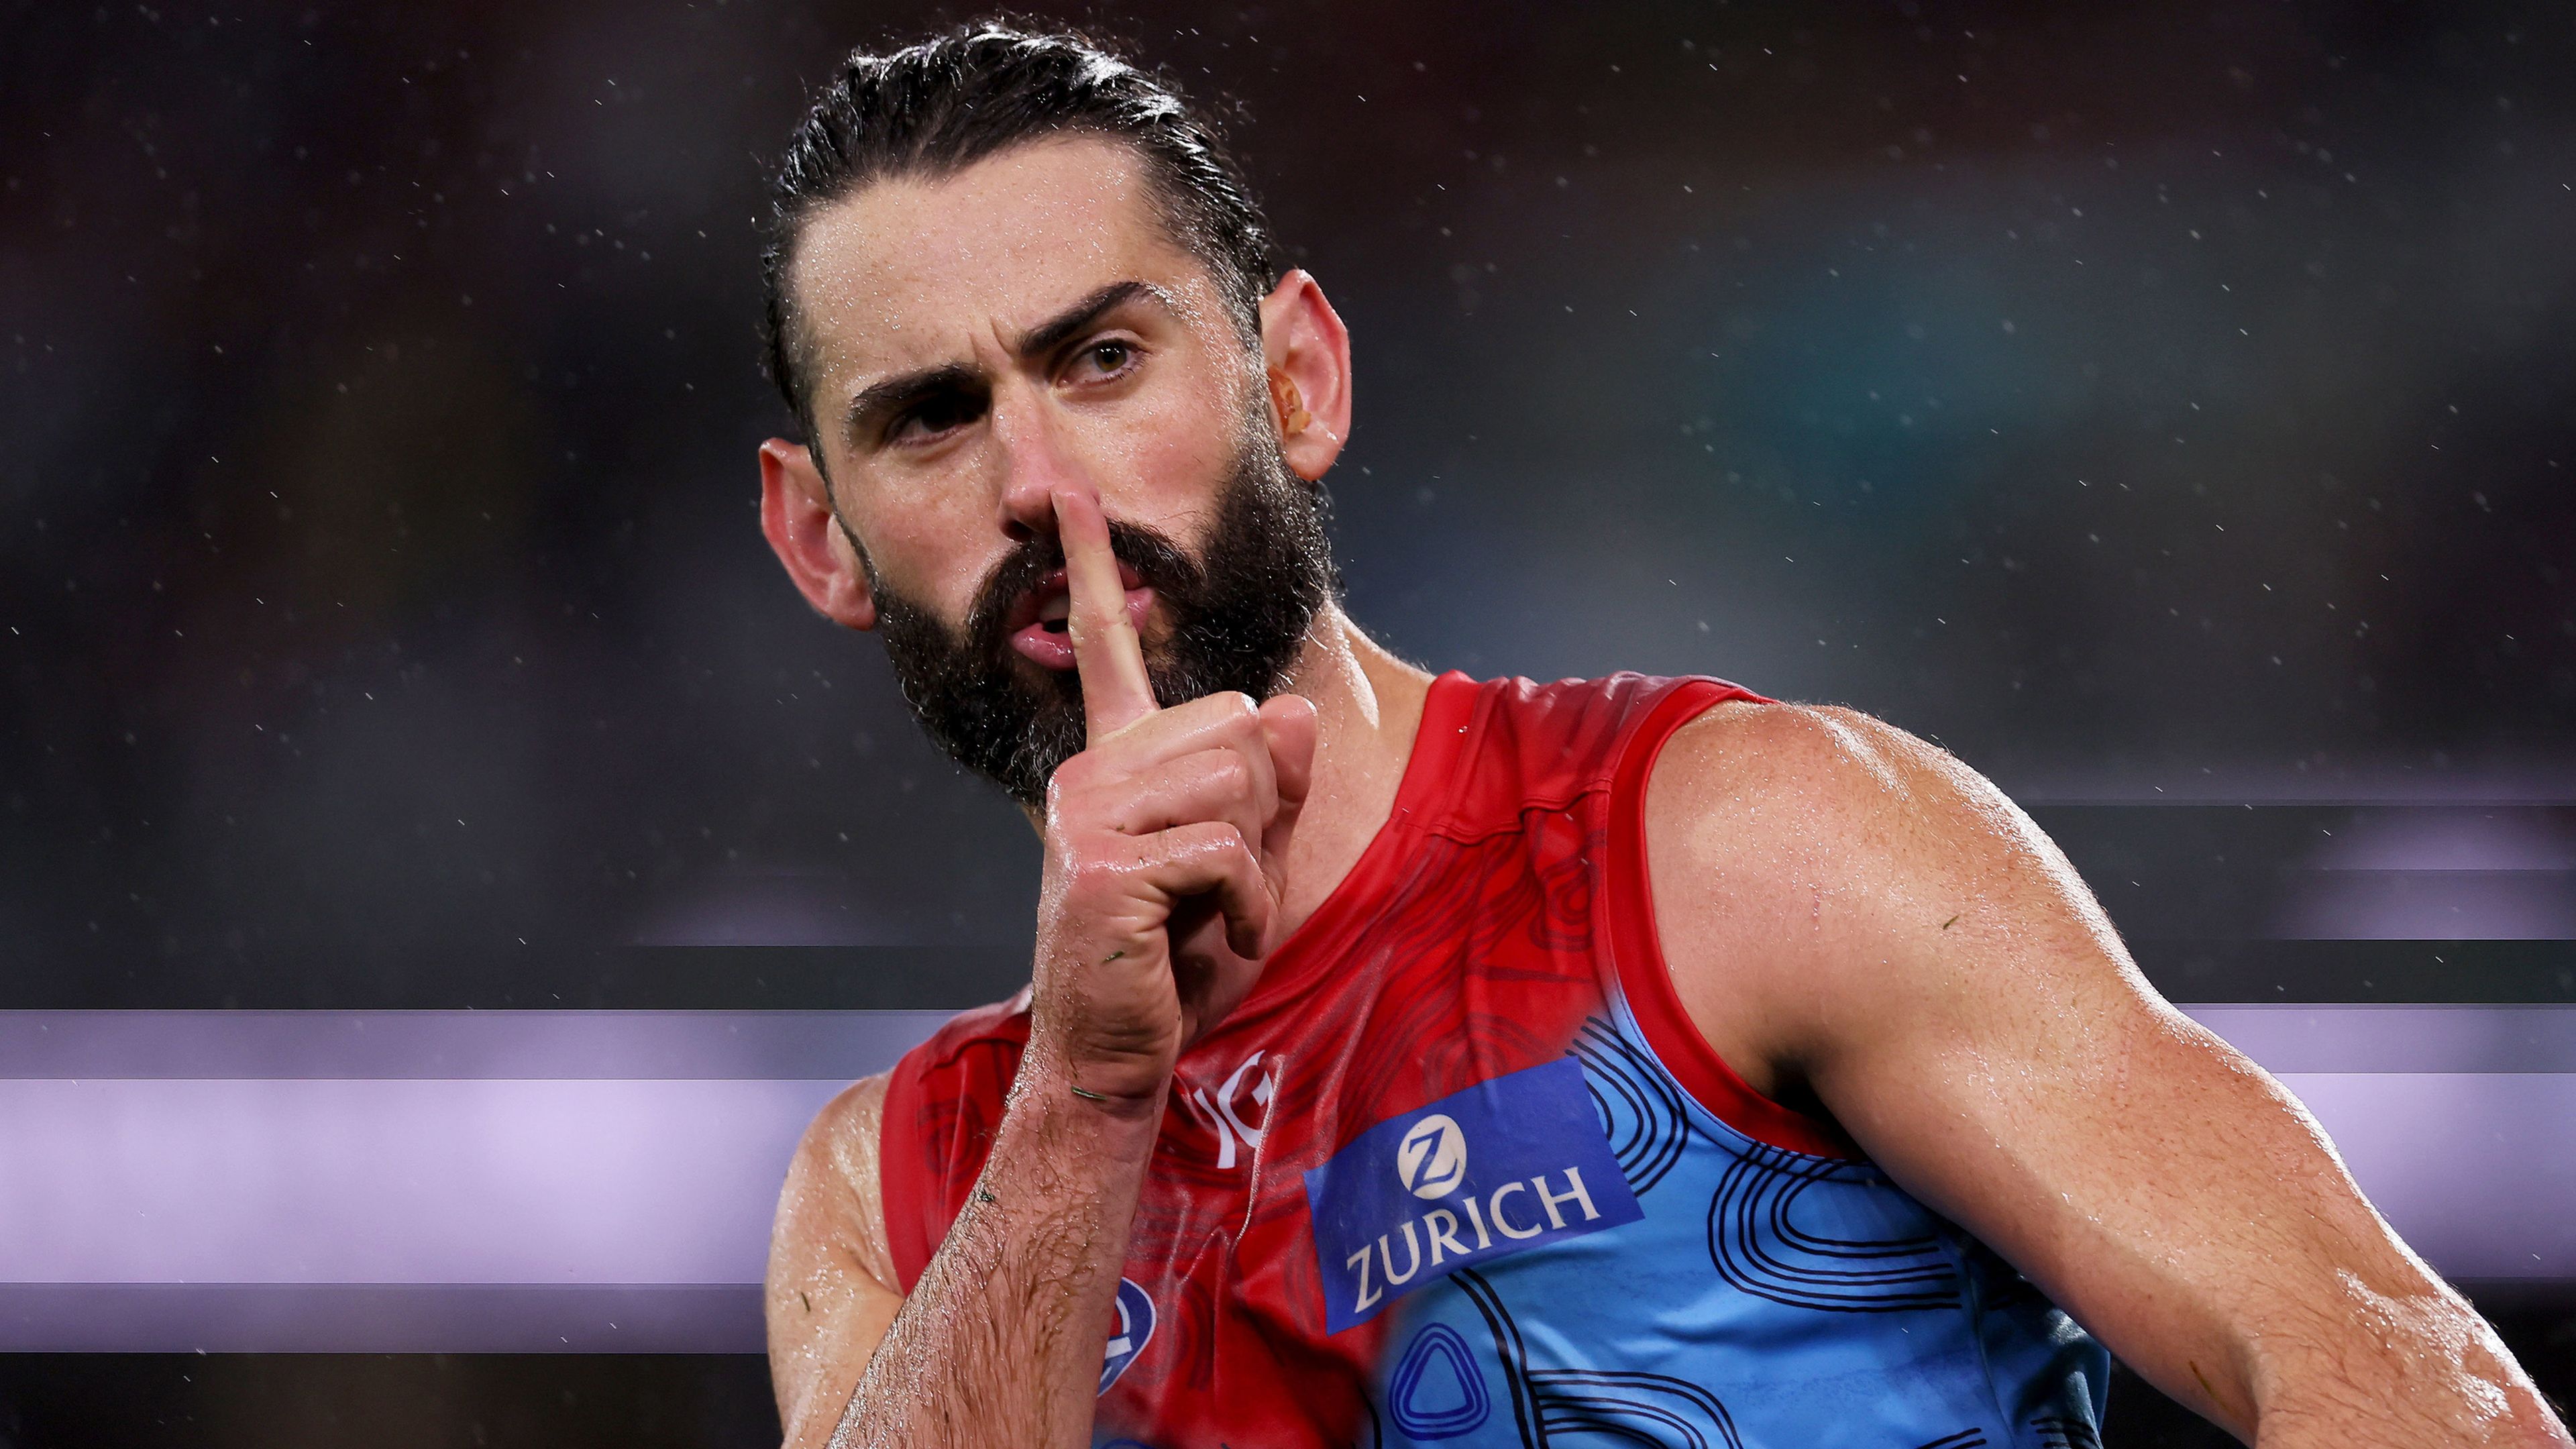 Eddie McGuire urges Collingwood fans to applaud rather than boo Brodie Grundy ahead of reunion